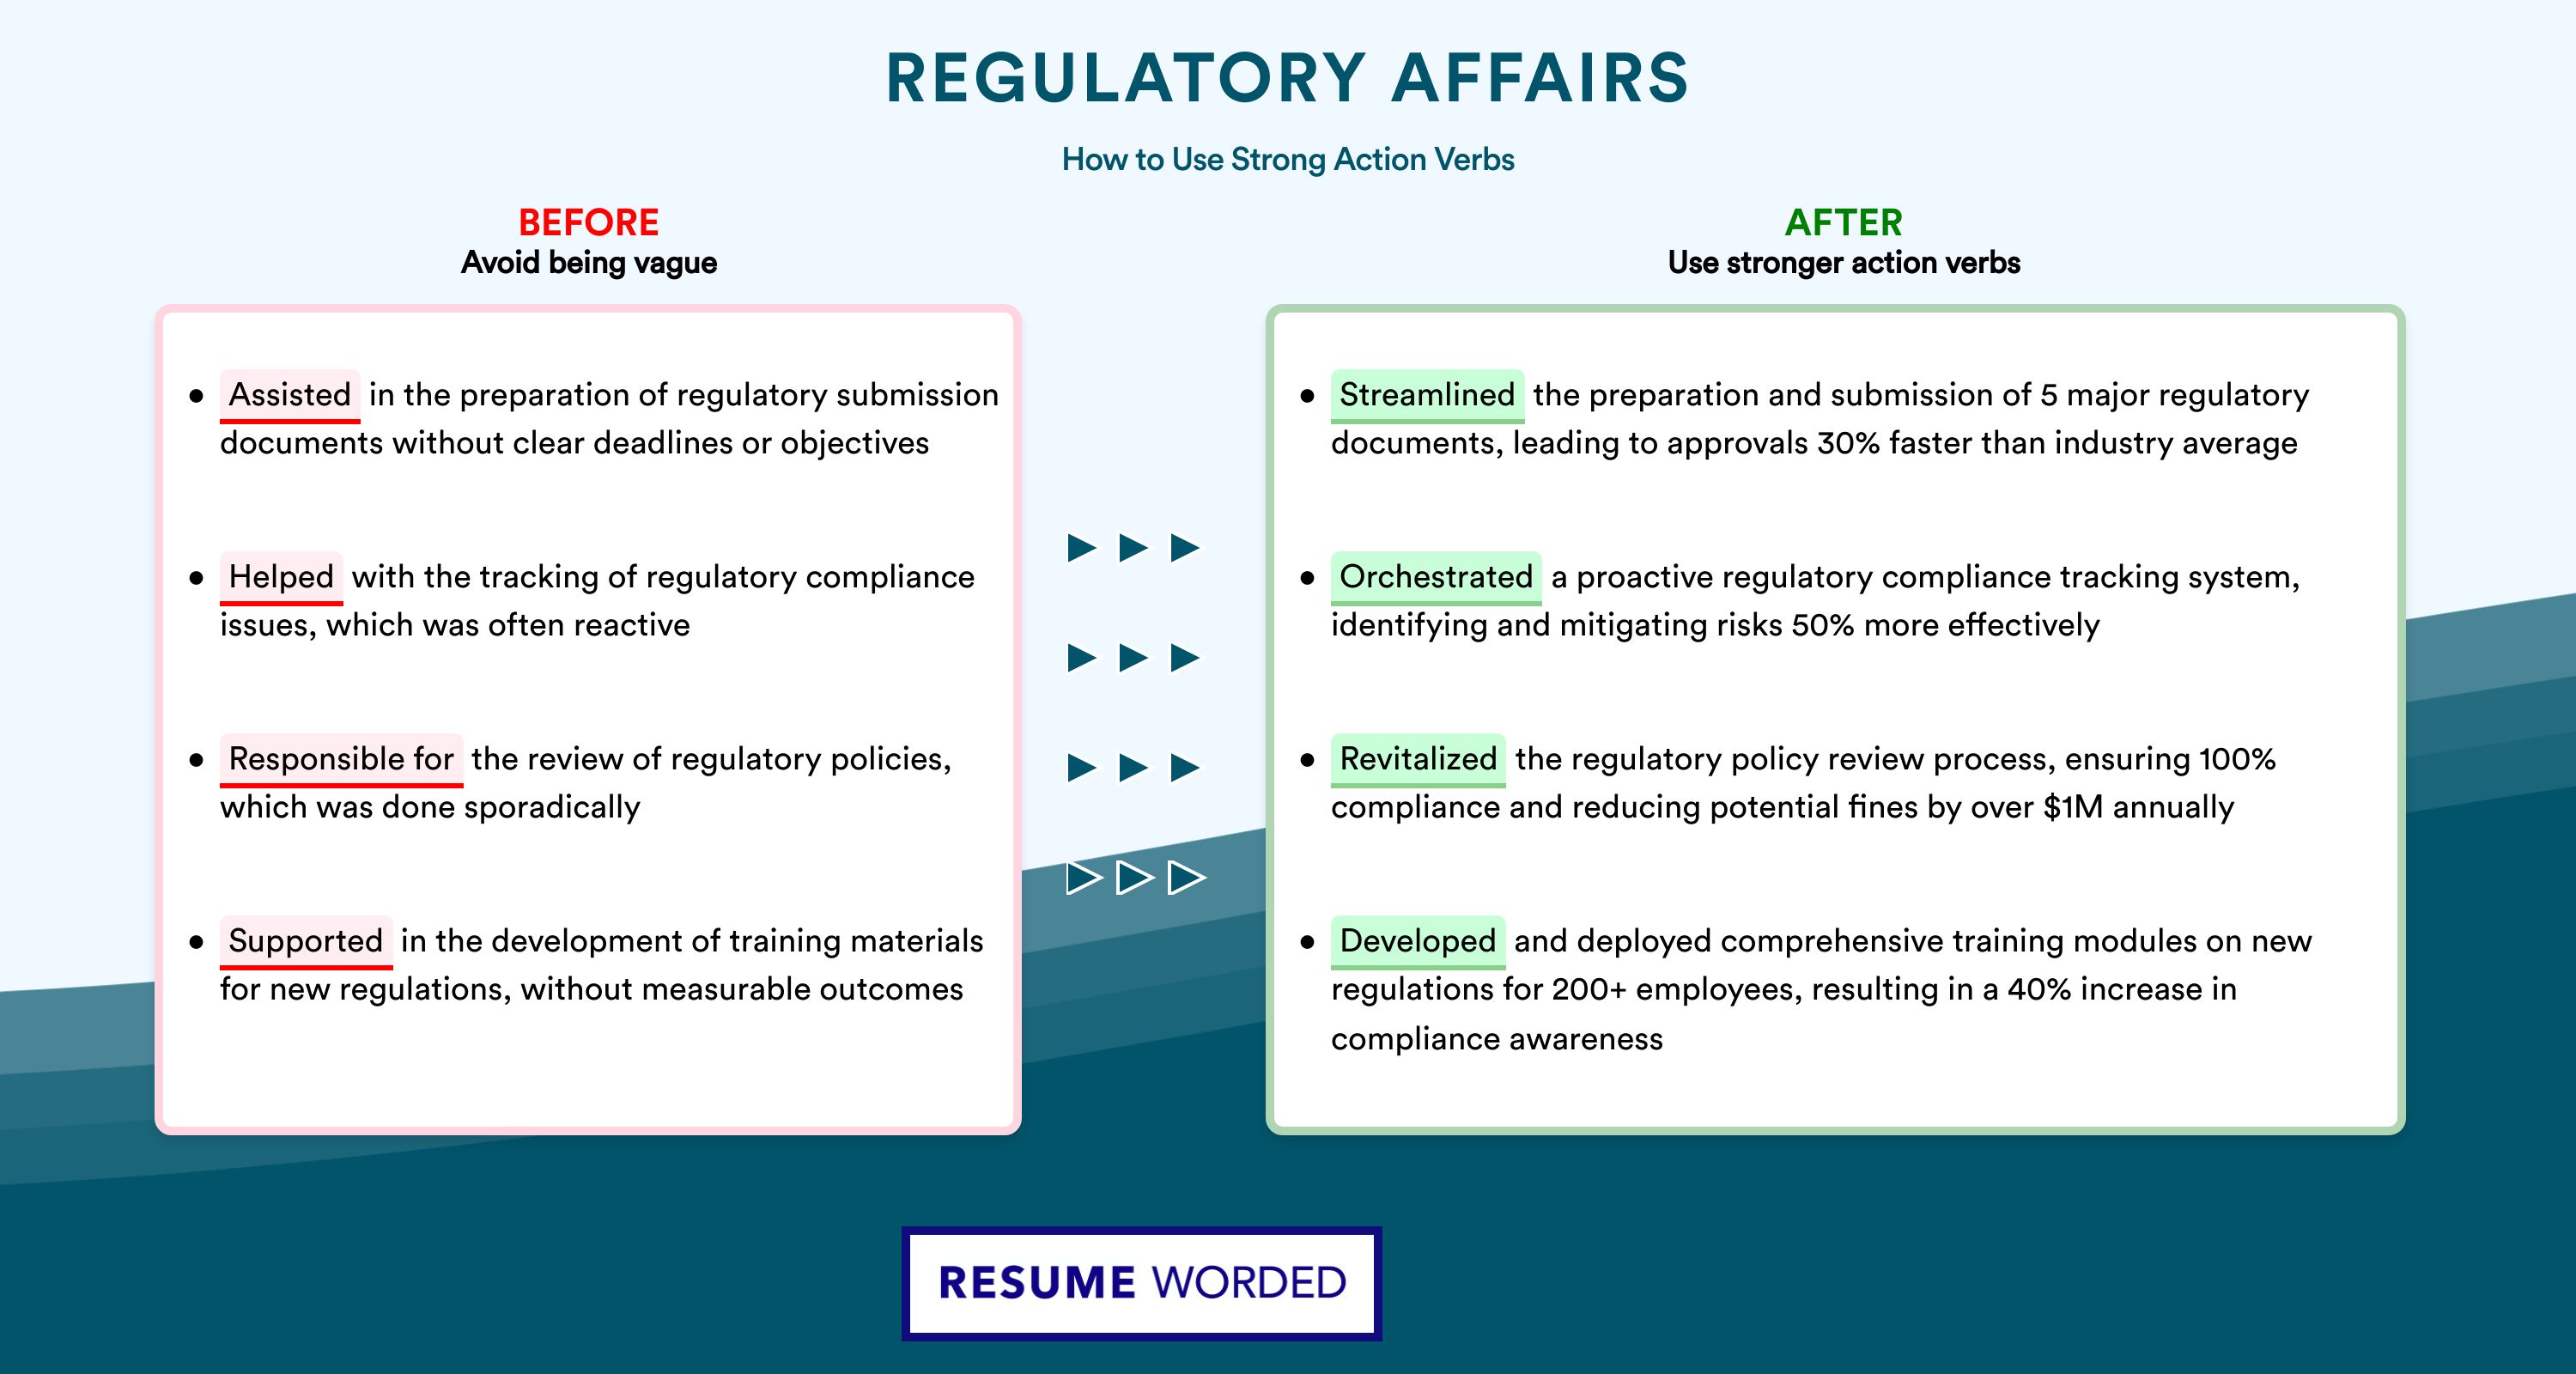 Action Verbs for Regulatory Affairs